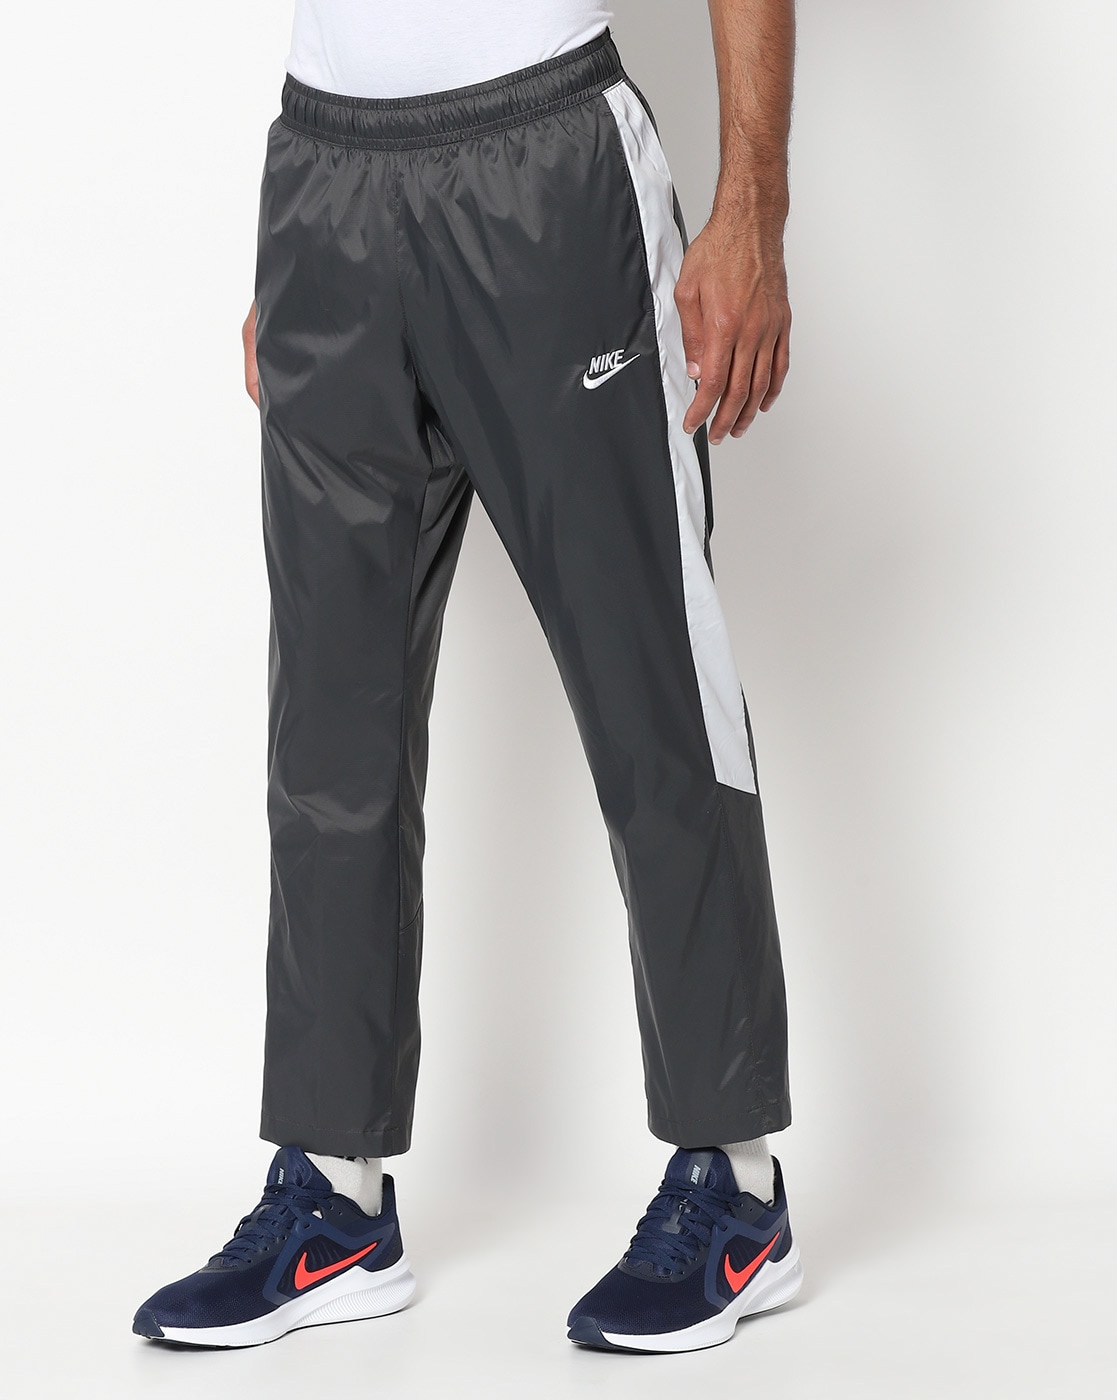 Nike Men's As M Nk Essential Woven Pant Track Pant, Grey, S : Amazon.in:  Clothing & Accessories